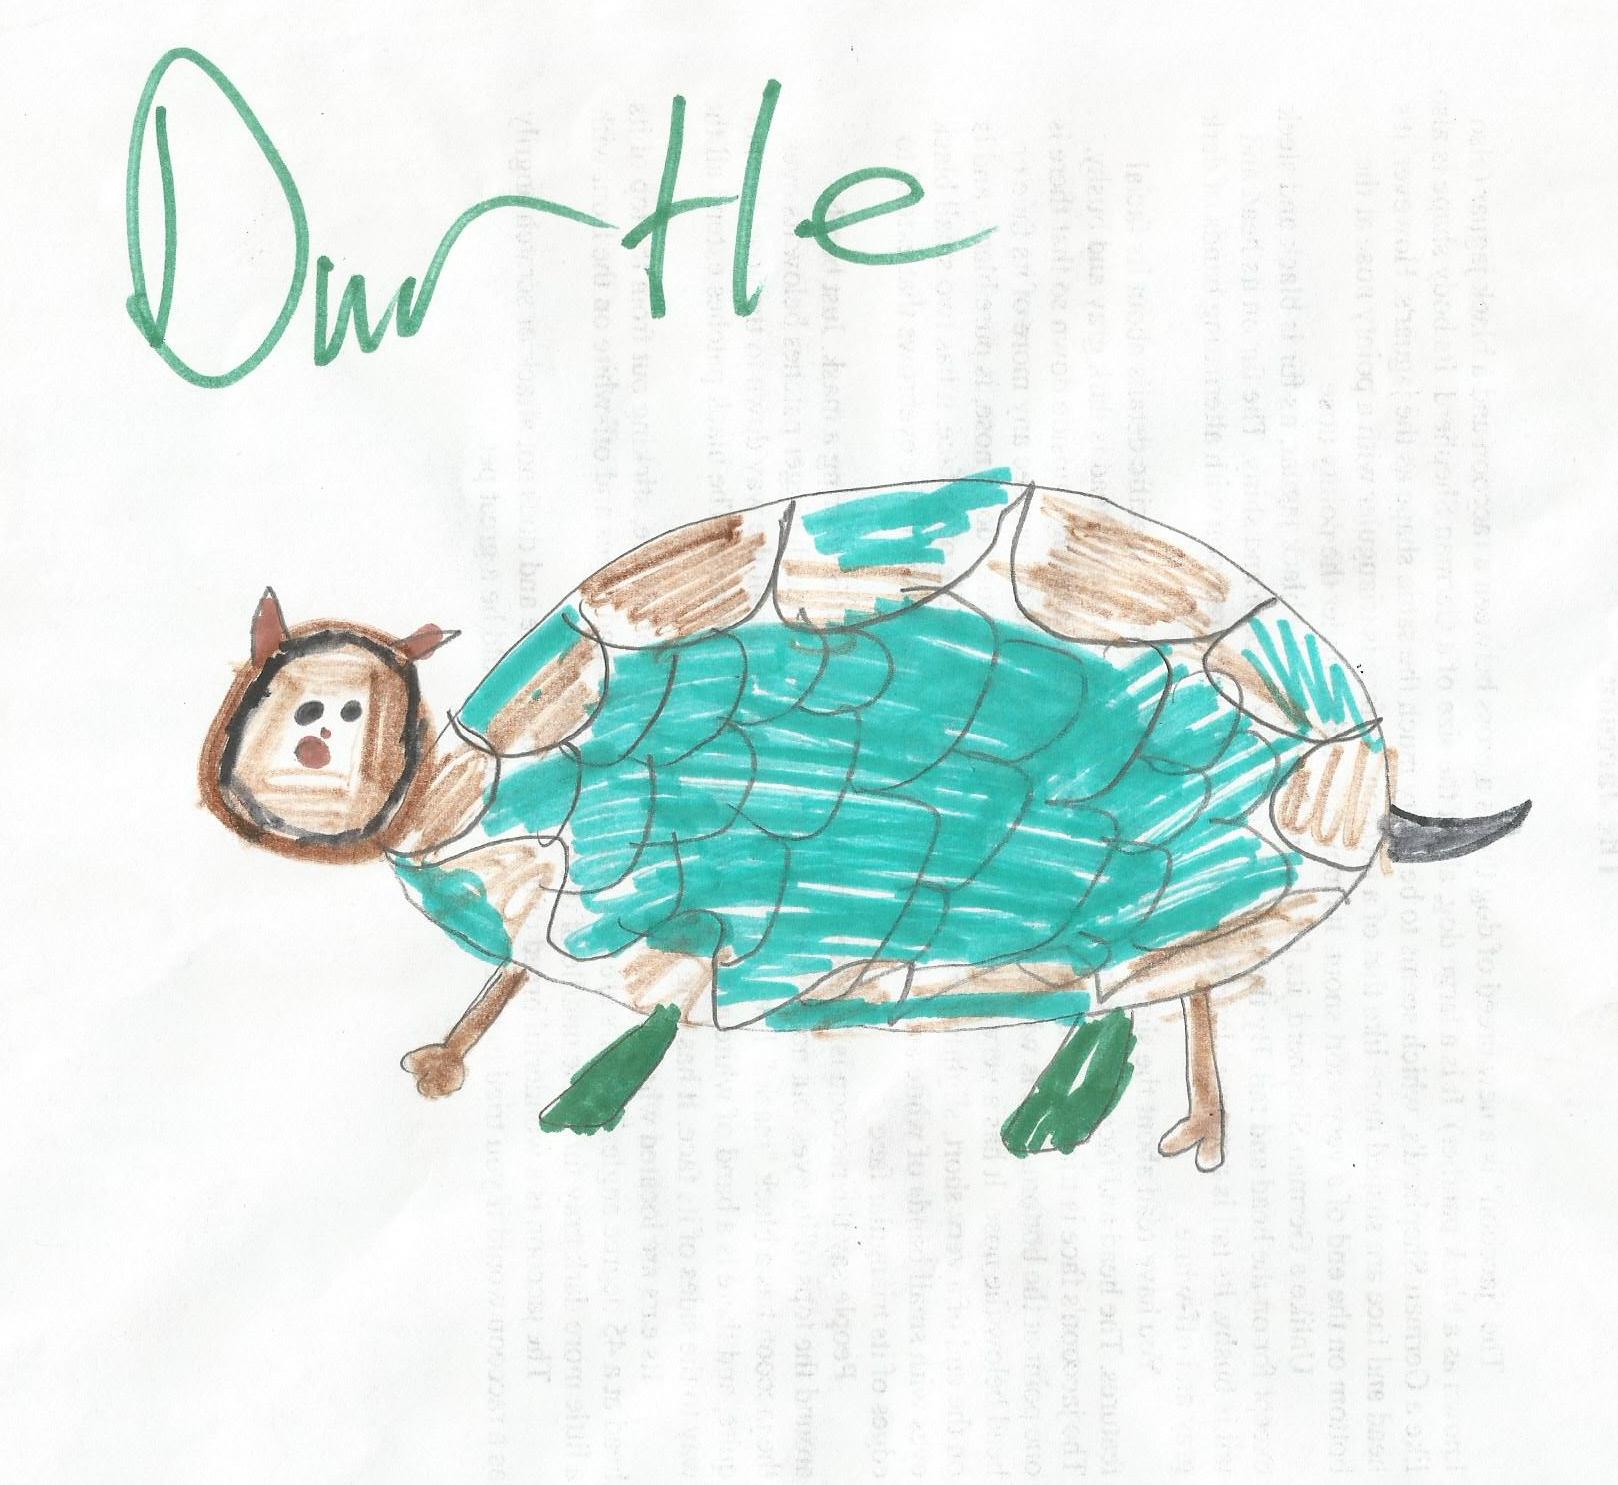 durtle create a critter example